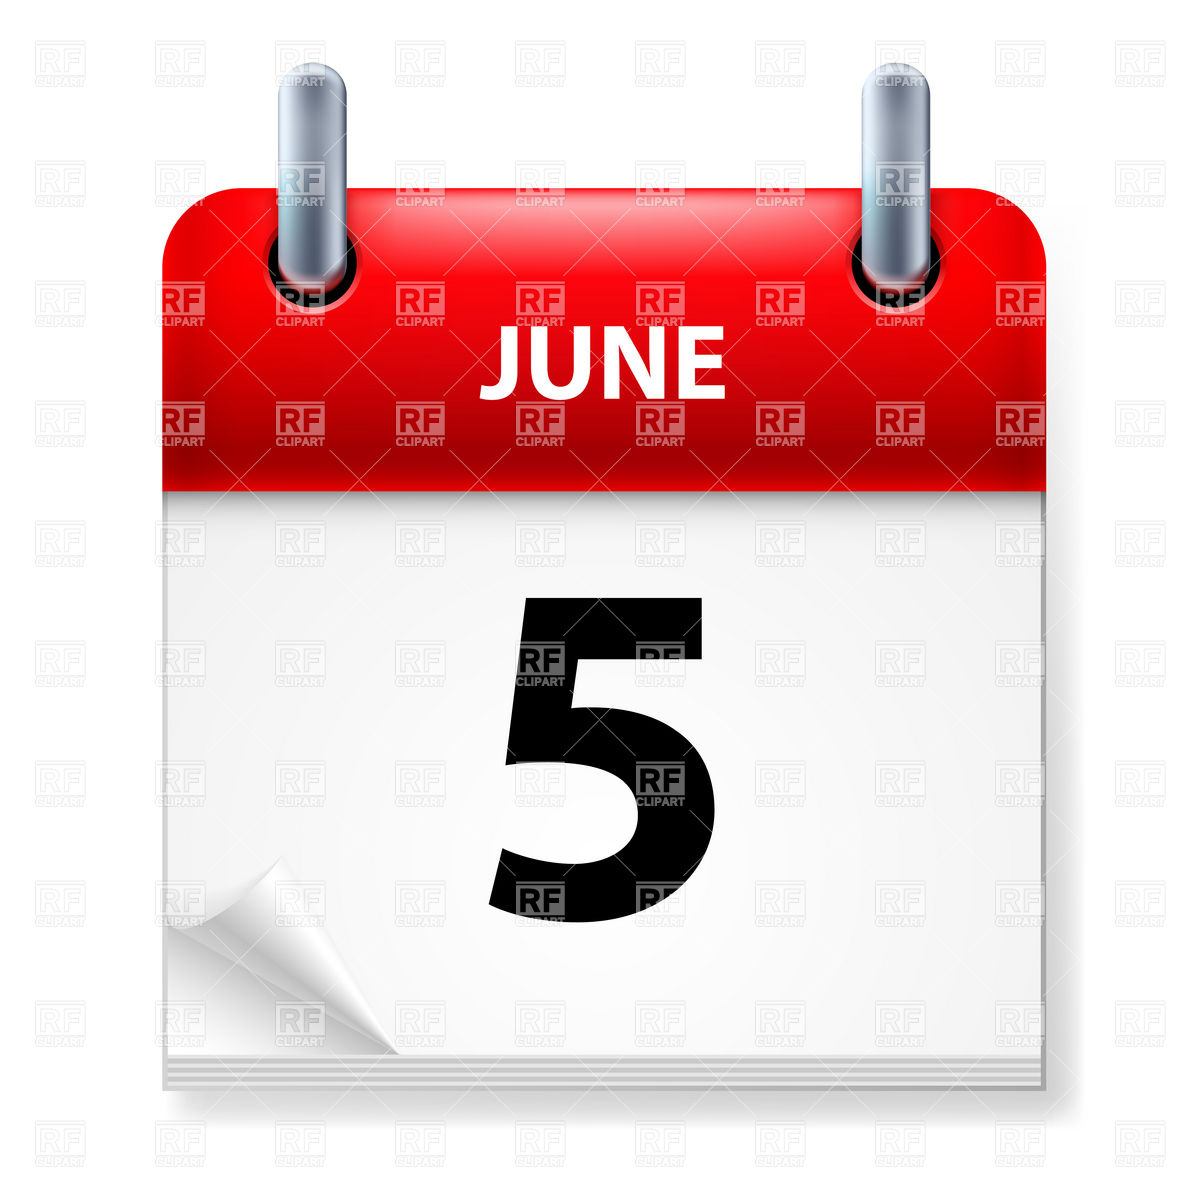 Calendar Icon   5 Of June 8818 Calendars Layouts Download Royalty